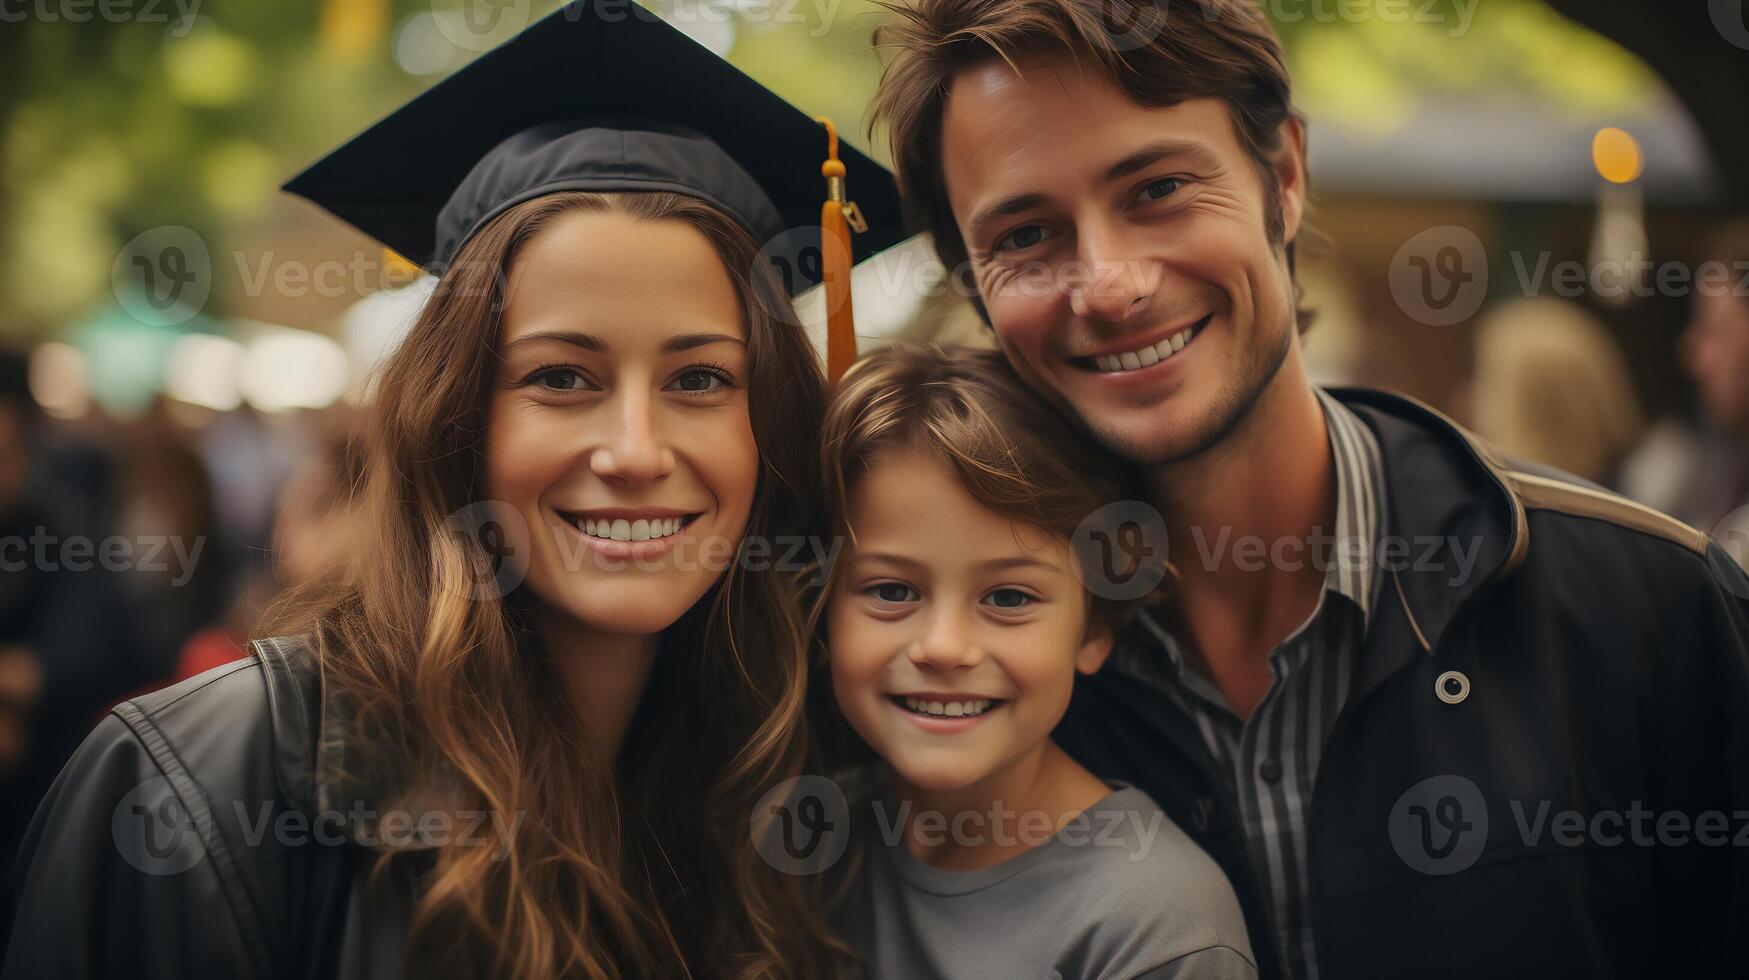 AI generated Family celebrating graduation ceremony outdoors. Joyful moment, education achievement concept, proud parents with graduating child, wearing cap and gown. photo